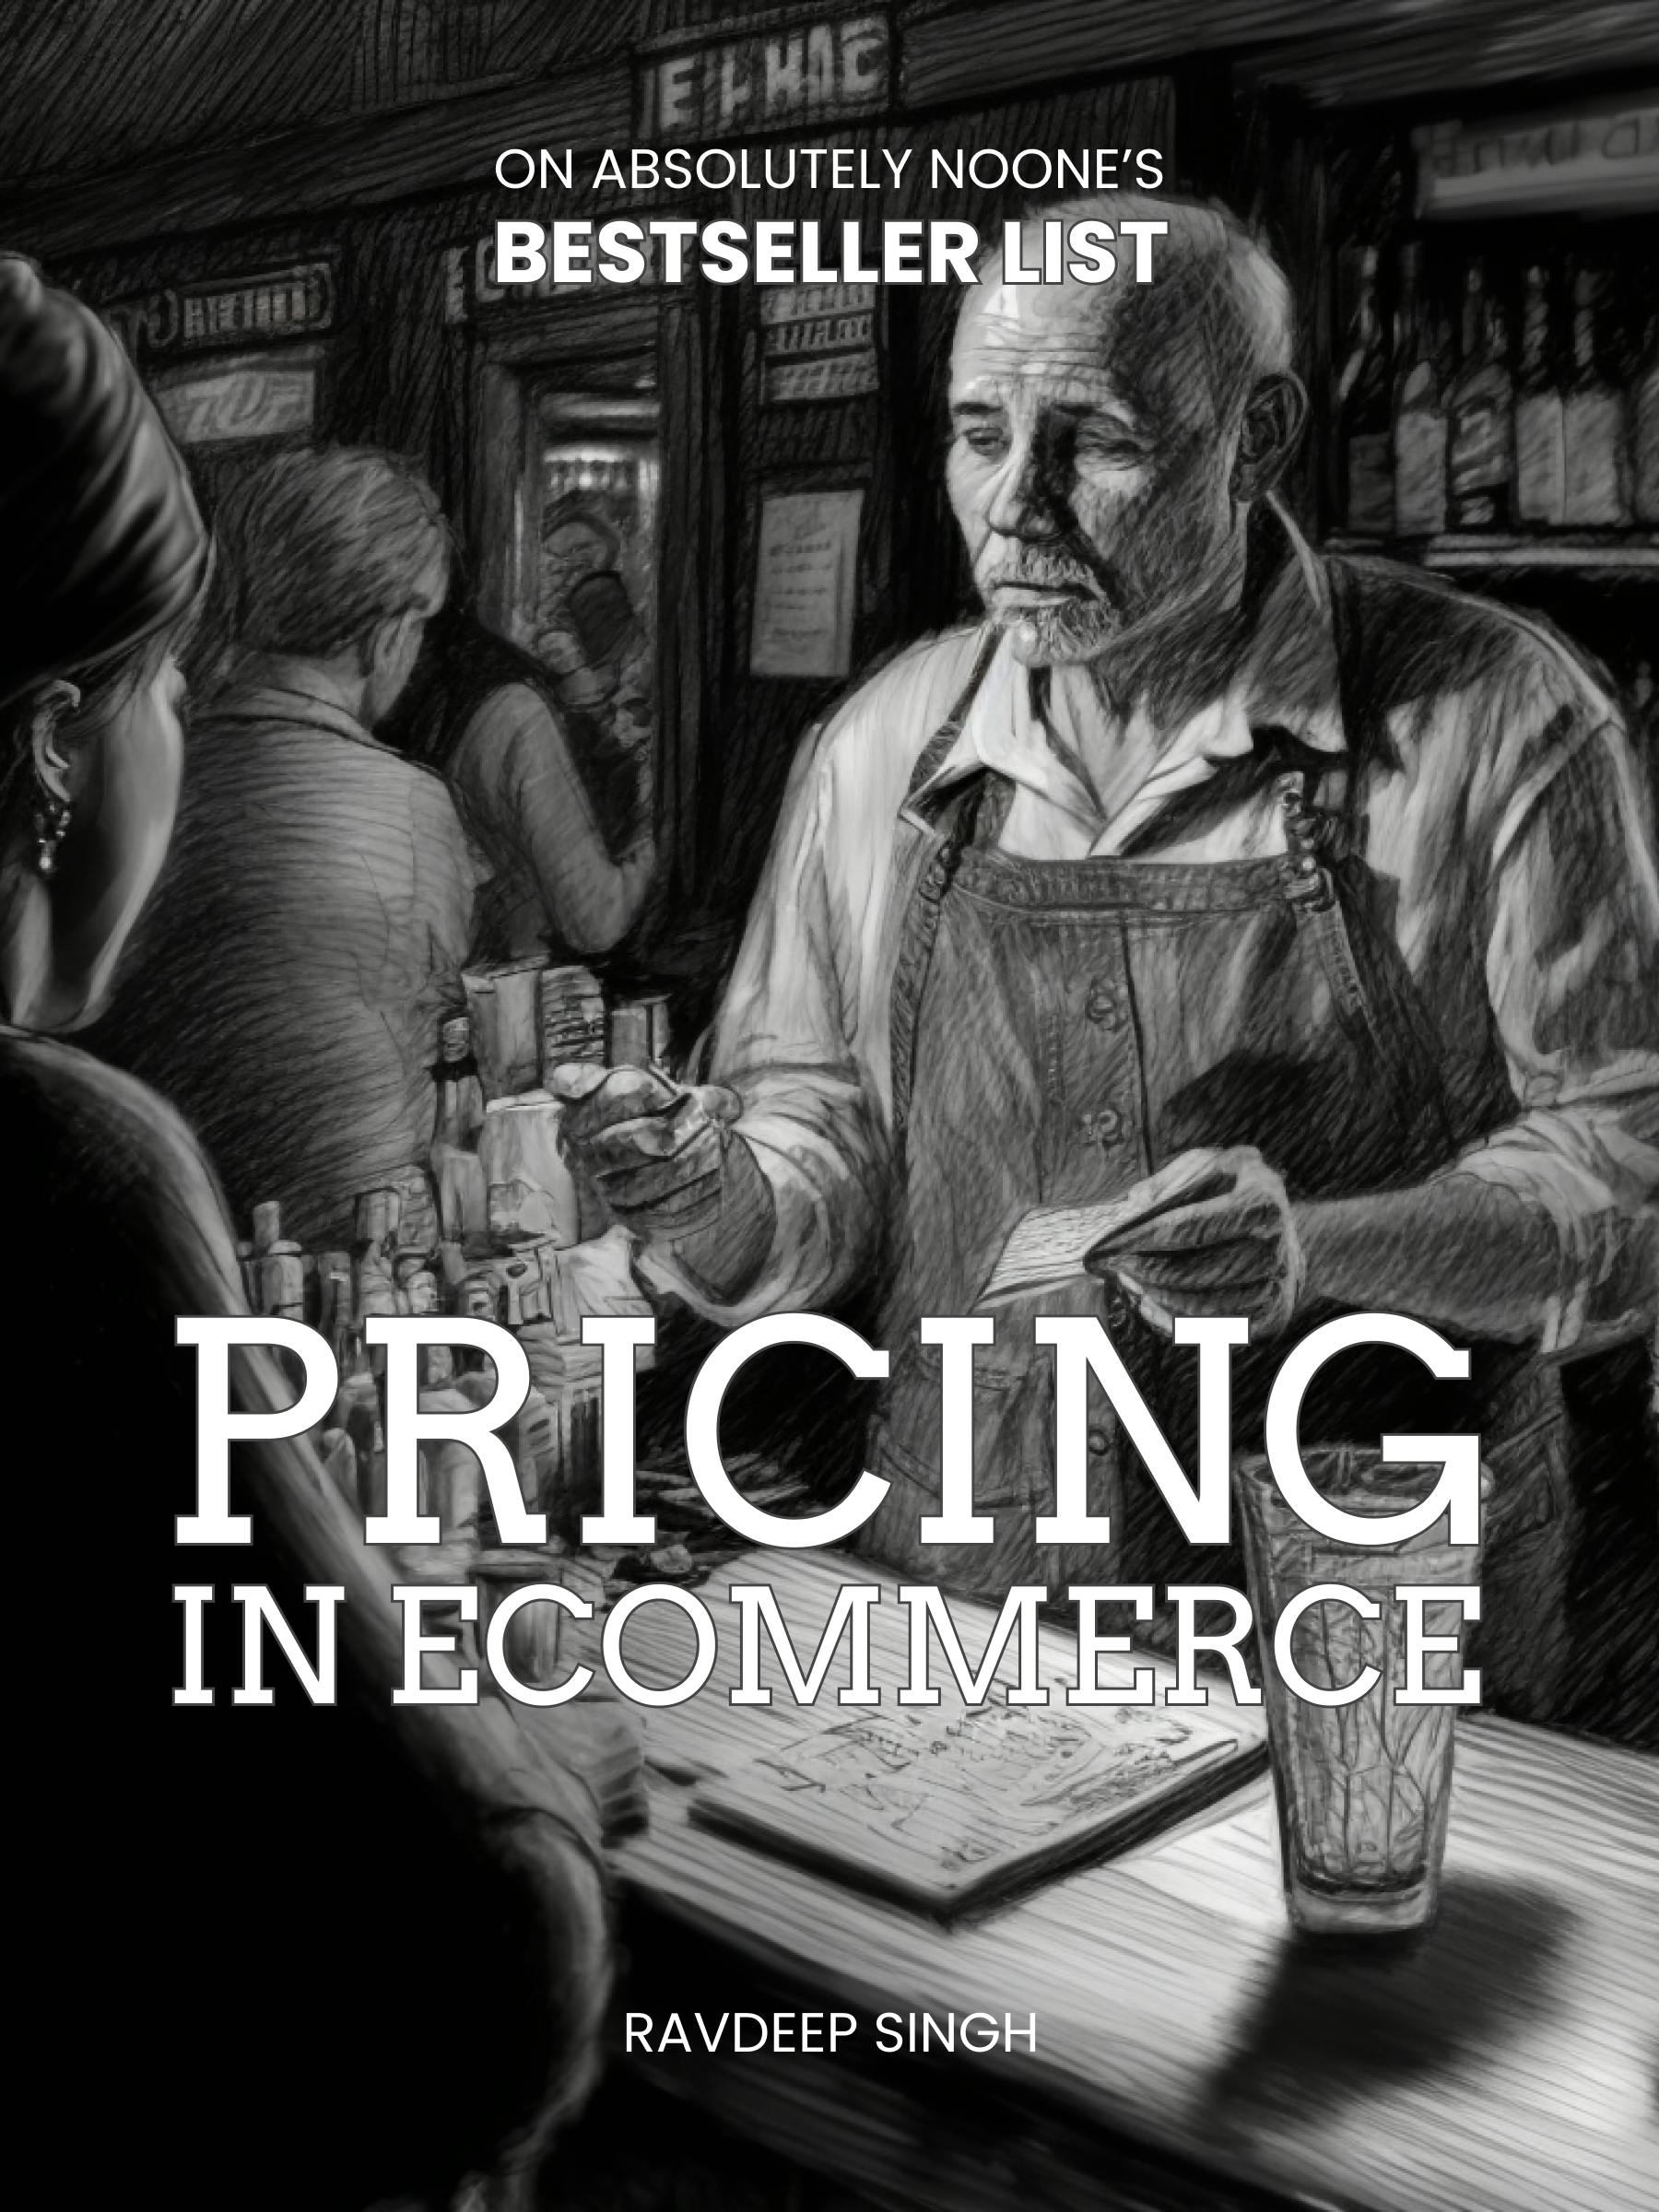 Pricing in ecommerce book